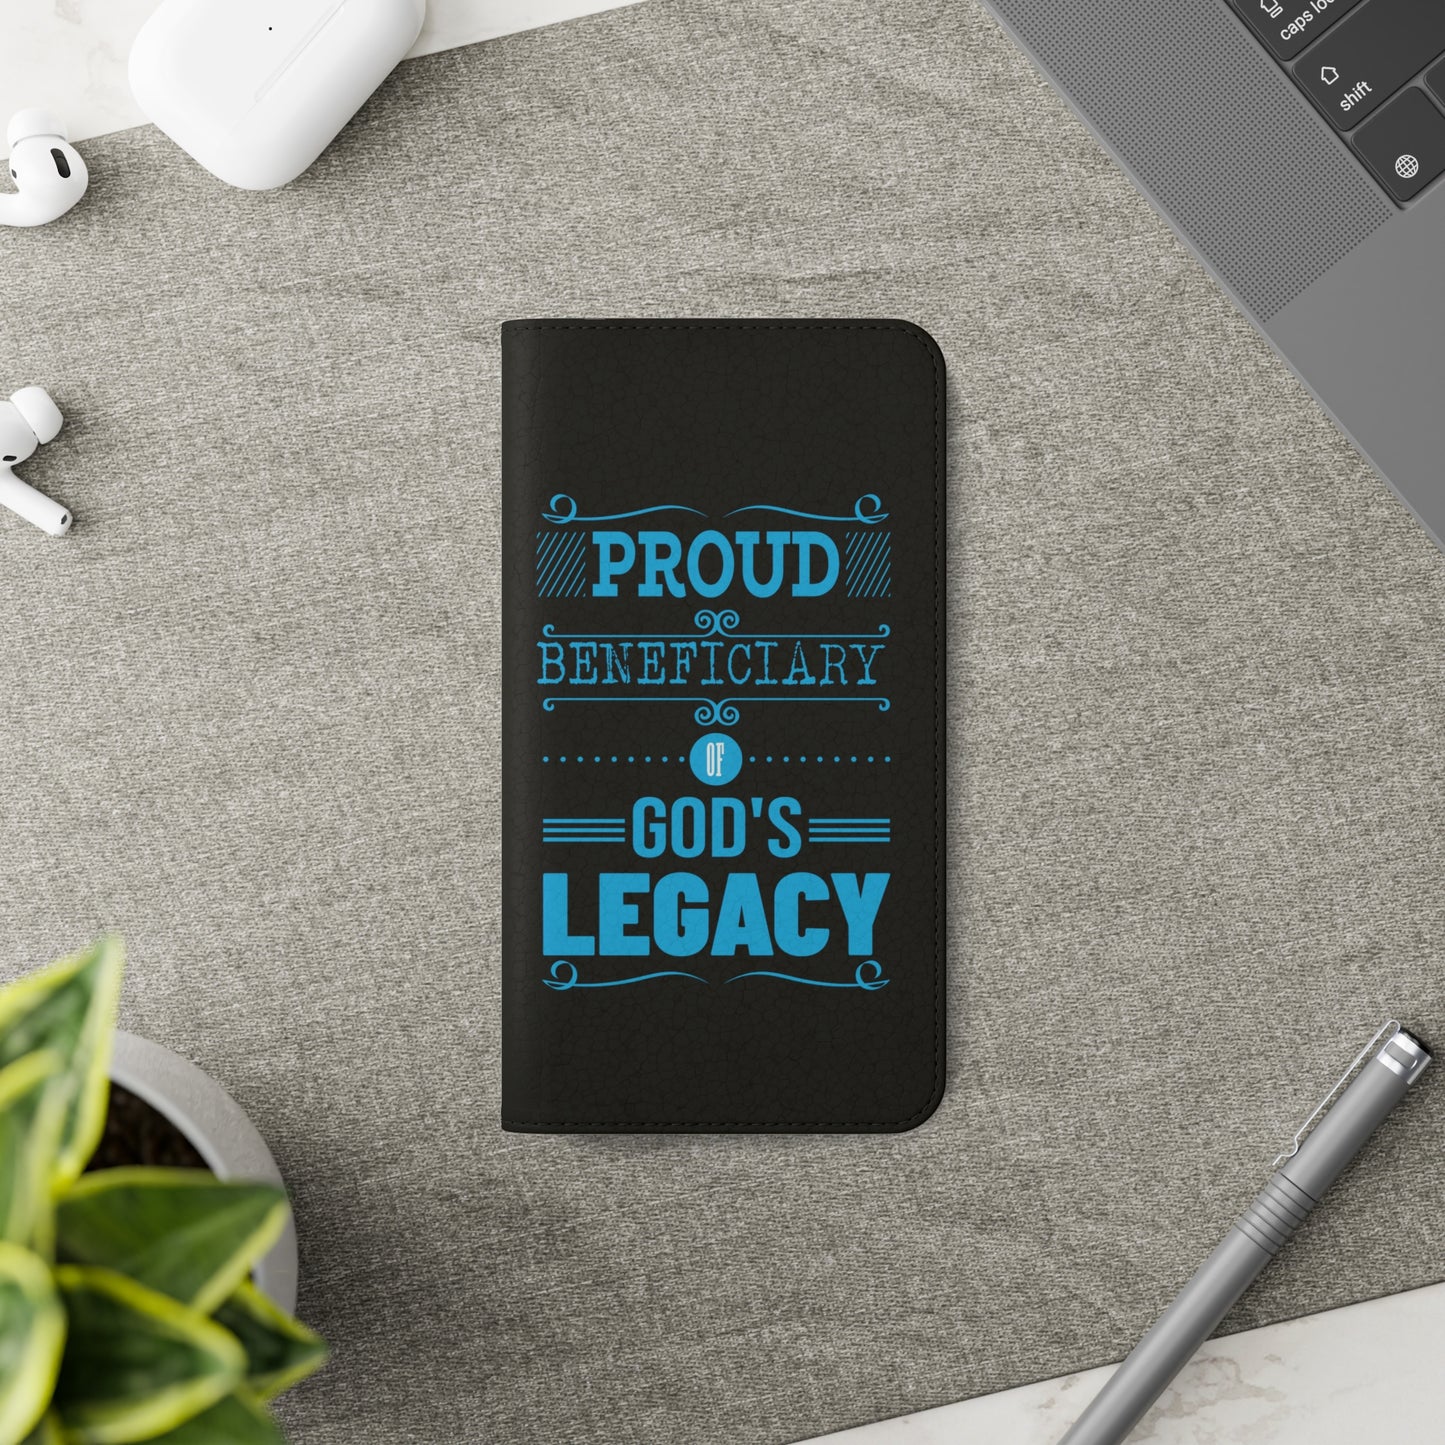 Proud Beneficiary of God's Legacy  Phone Flip Cases